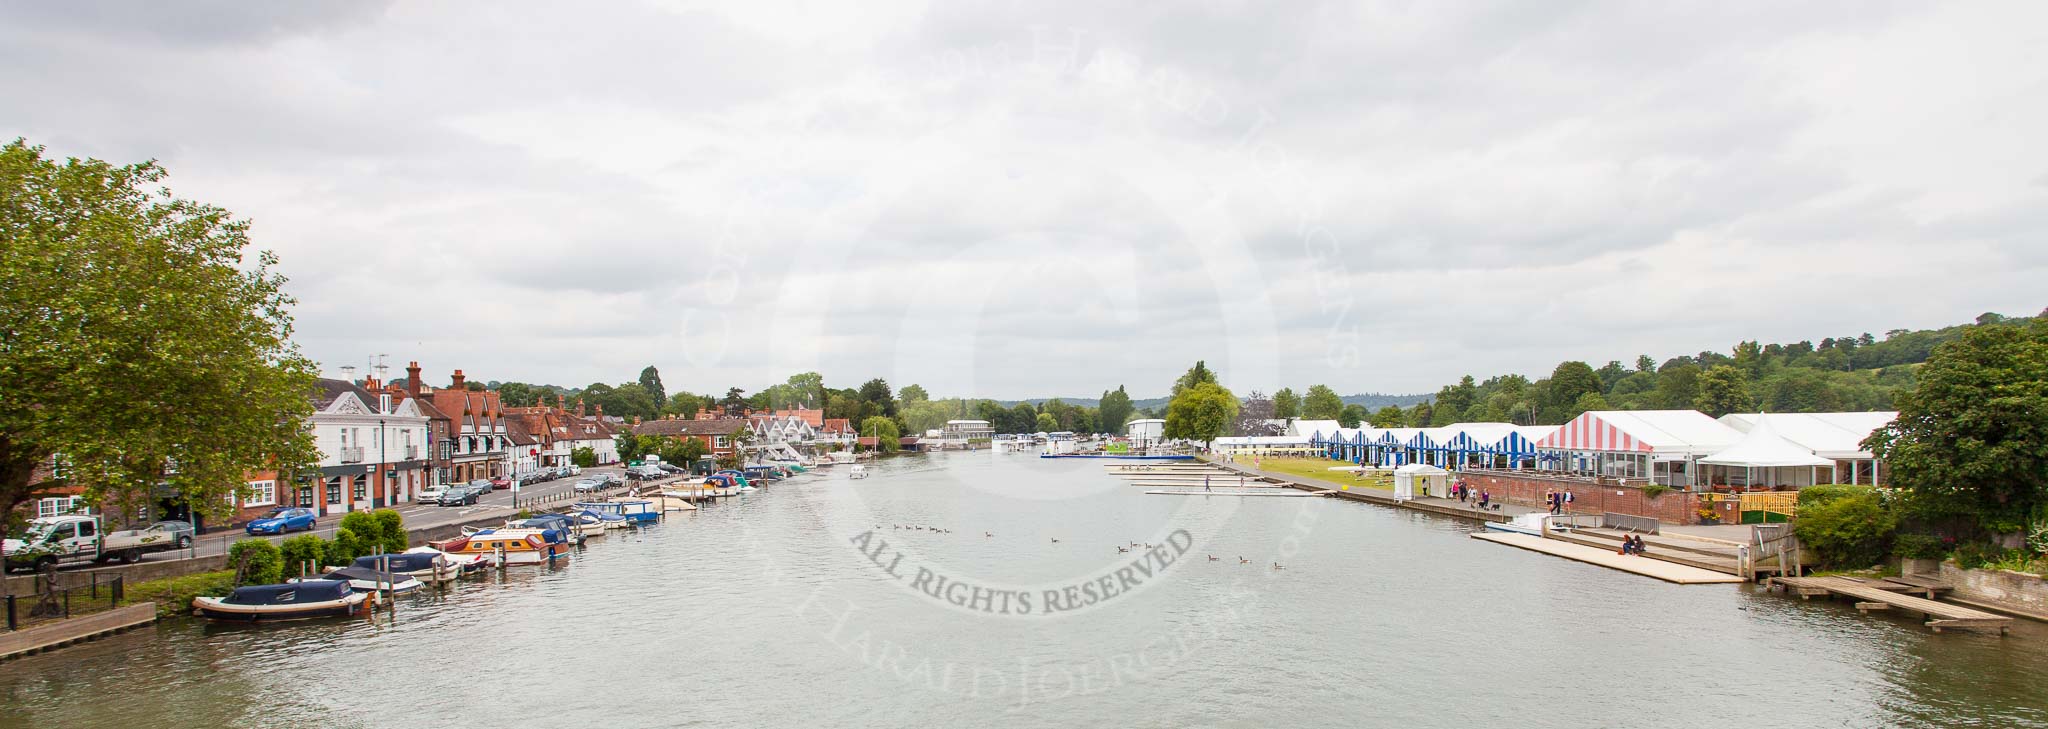 Henley Royal Regatta 2013 (Monday): Seen from Henley Bridge, the River Thames with the HRR finish line and the boat tents on the right..
River Thames between Henley and Temple Island,
Henley-on-Thames,
Berkshire,
United Kingdom,
on 01 July 2013 at 14:04, image #2